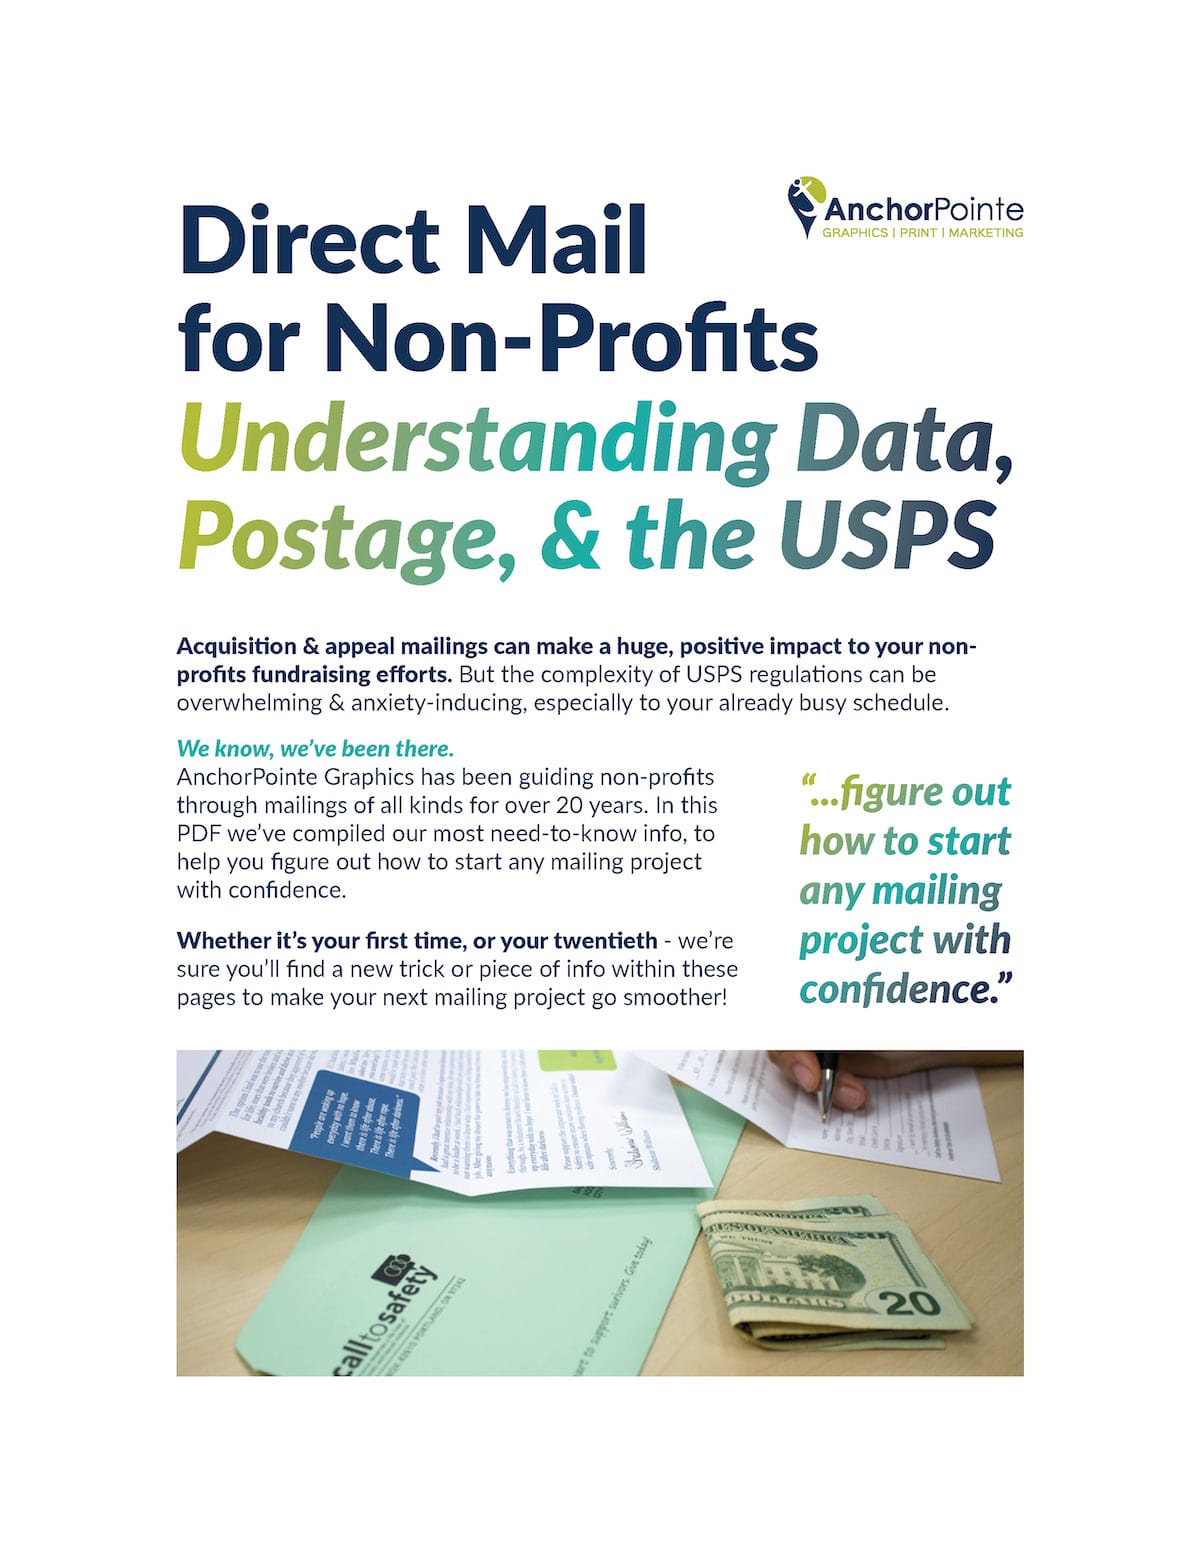 Direct Mail for Non-Profits - Understanding Data, Postage, & the USPS